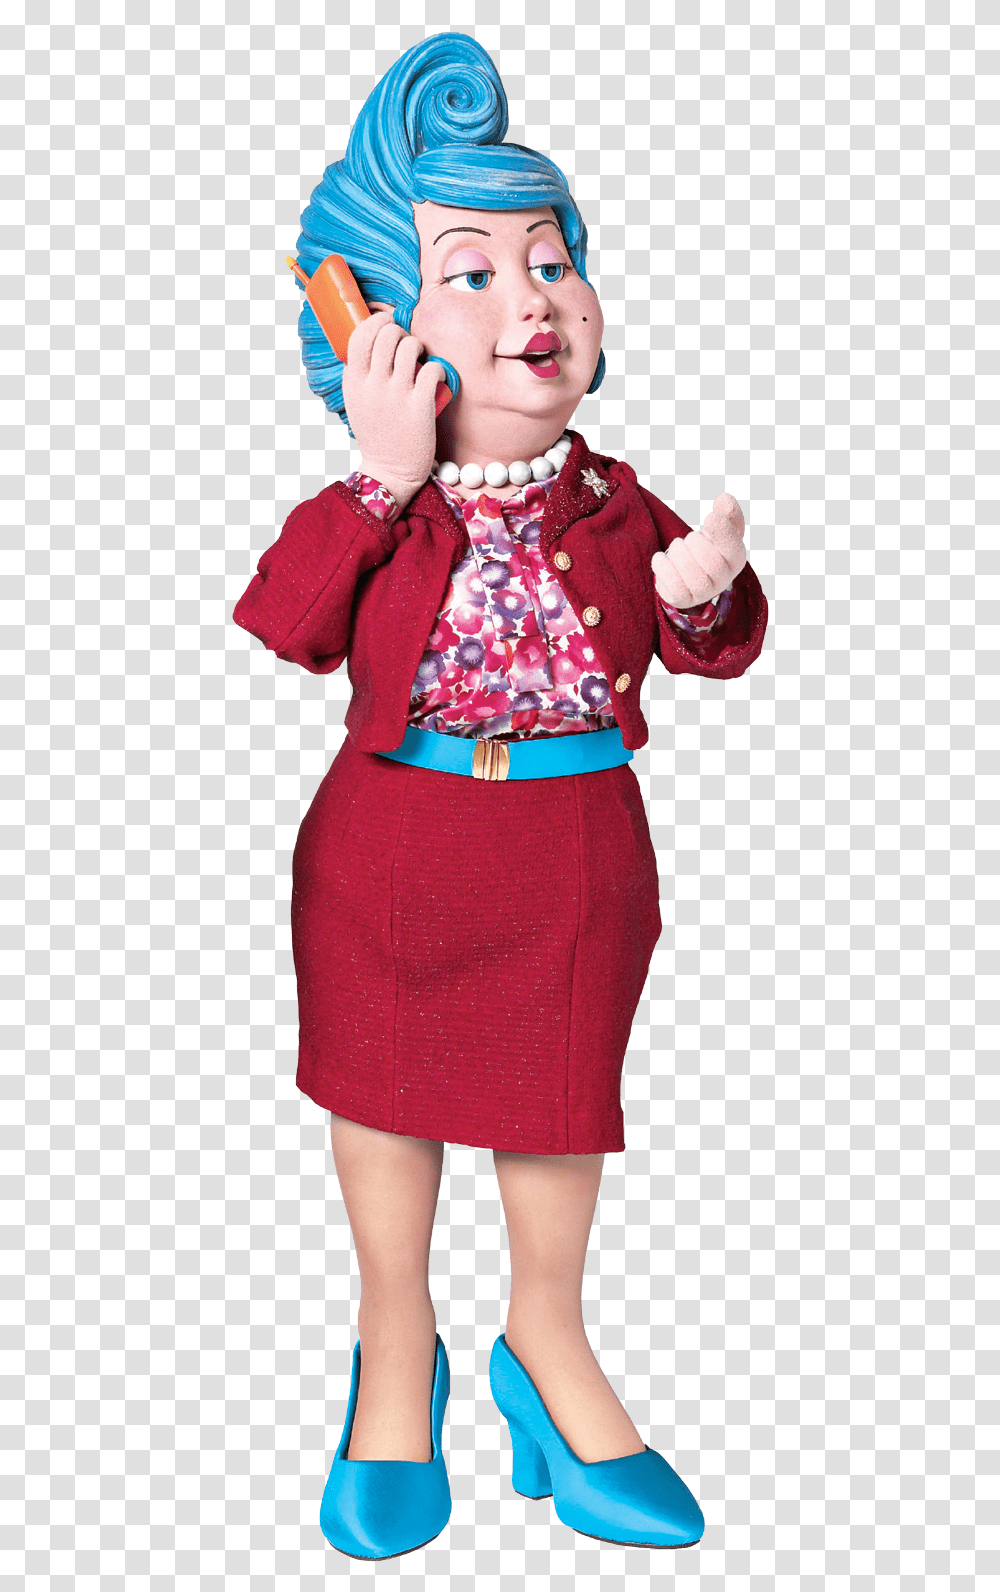 Image Nick Jr Lazytown Stingy 4 Lazytown Wiki Image Lazy Town Bessie Busybody, Apparel, Skirt, Performer Transparent Png